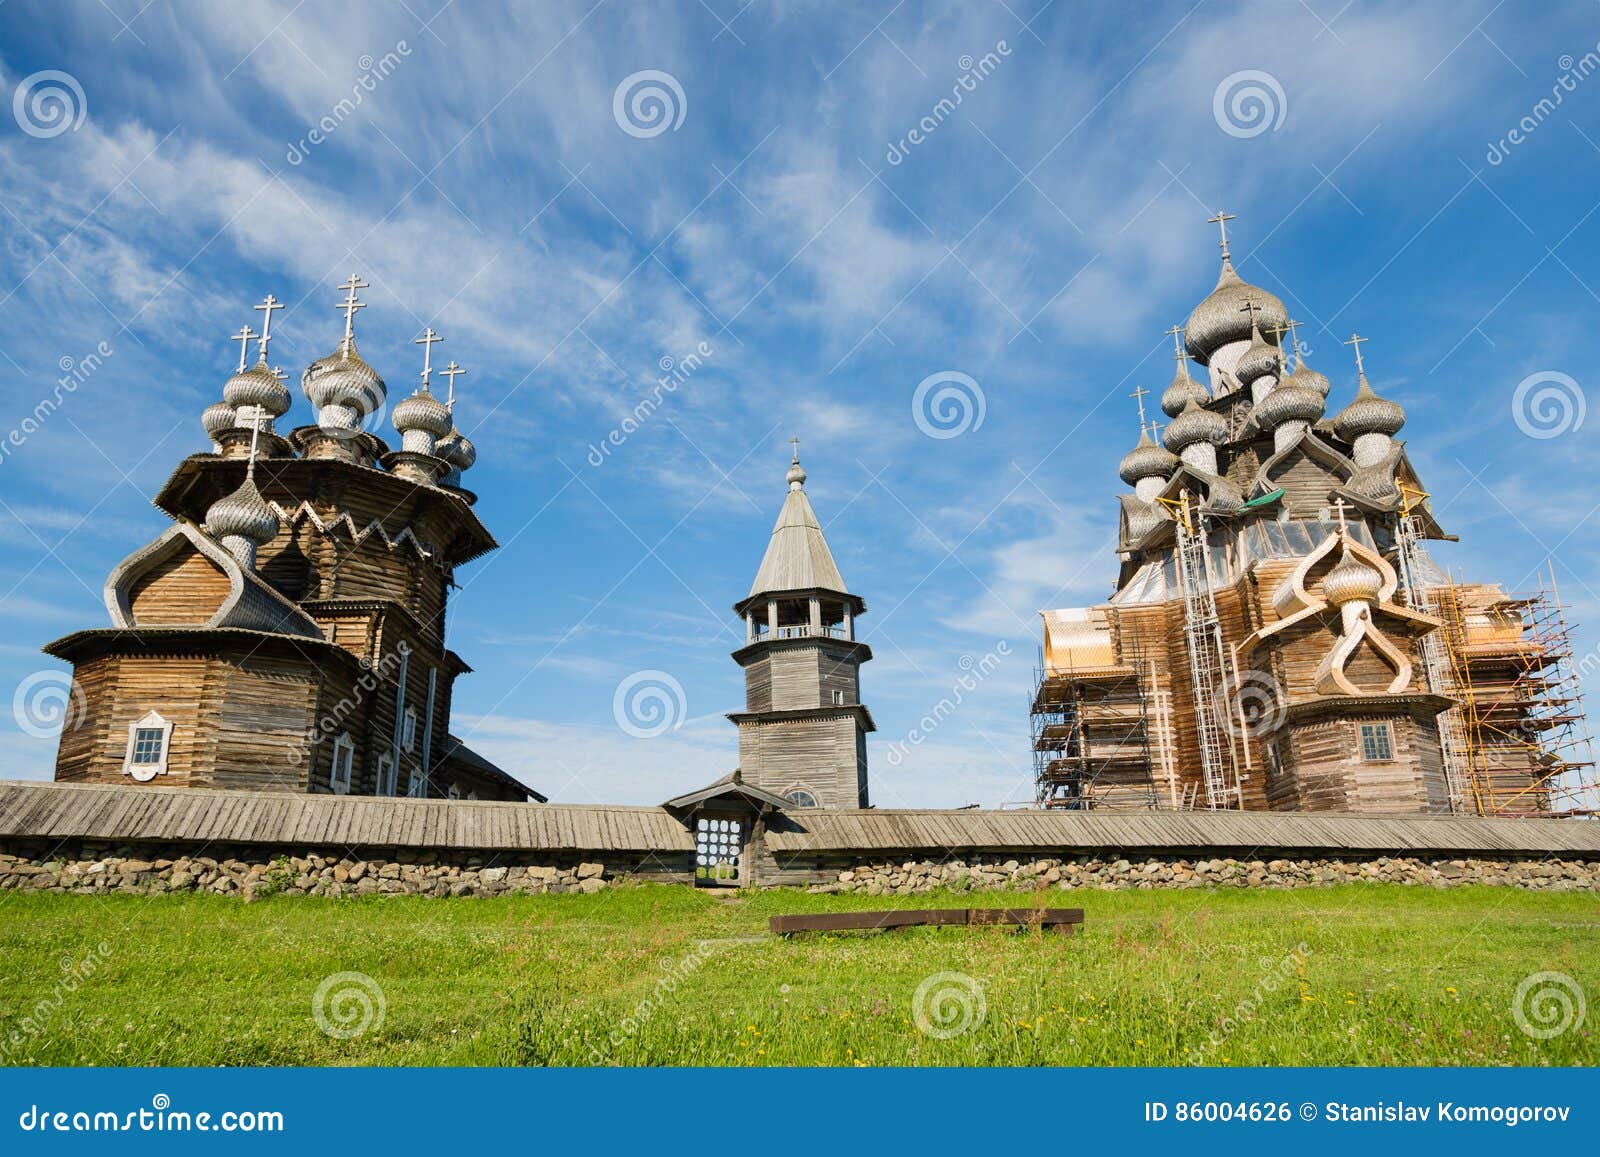 famous architectural ensemble on kizhi island in russia